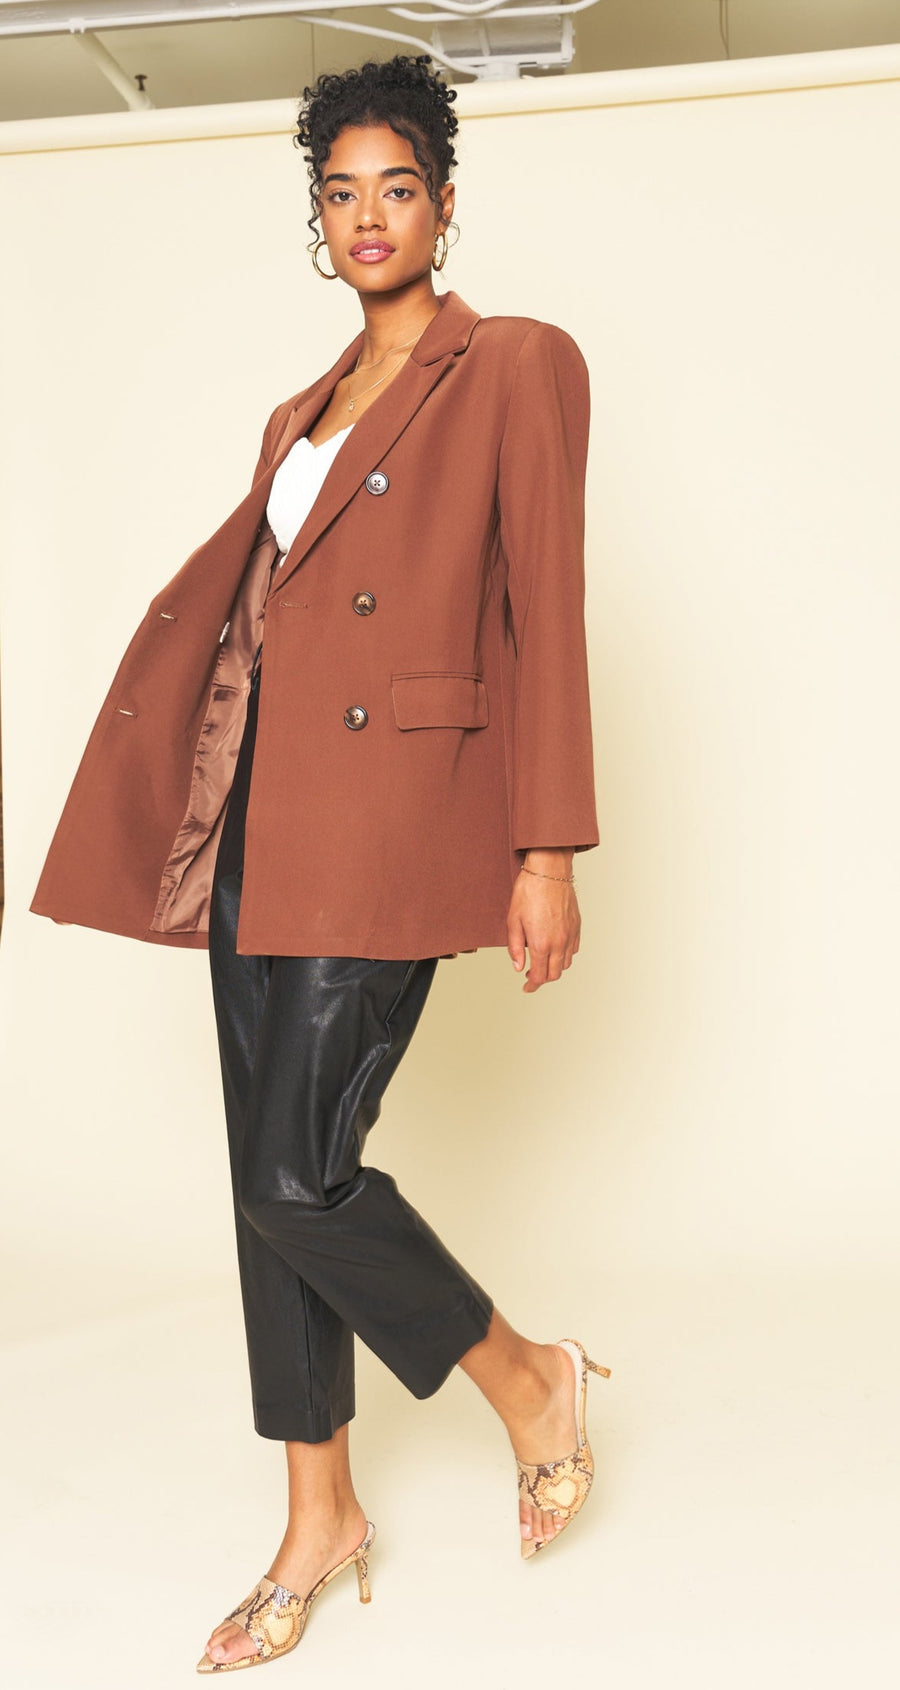 No Srcipt image - Images of 2 of 6 Brown Wool Classic Double Breasted Staple Jacket Women's Workwear Office Wear Women's Fashion Sophisticated Style Chic Simple Classic Brown Blazer Fall Jacket Fall Fashion Women's Outerwear Timeless Everyday Blazer Neutral Color The Emory Blazer In Brown